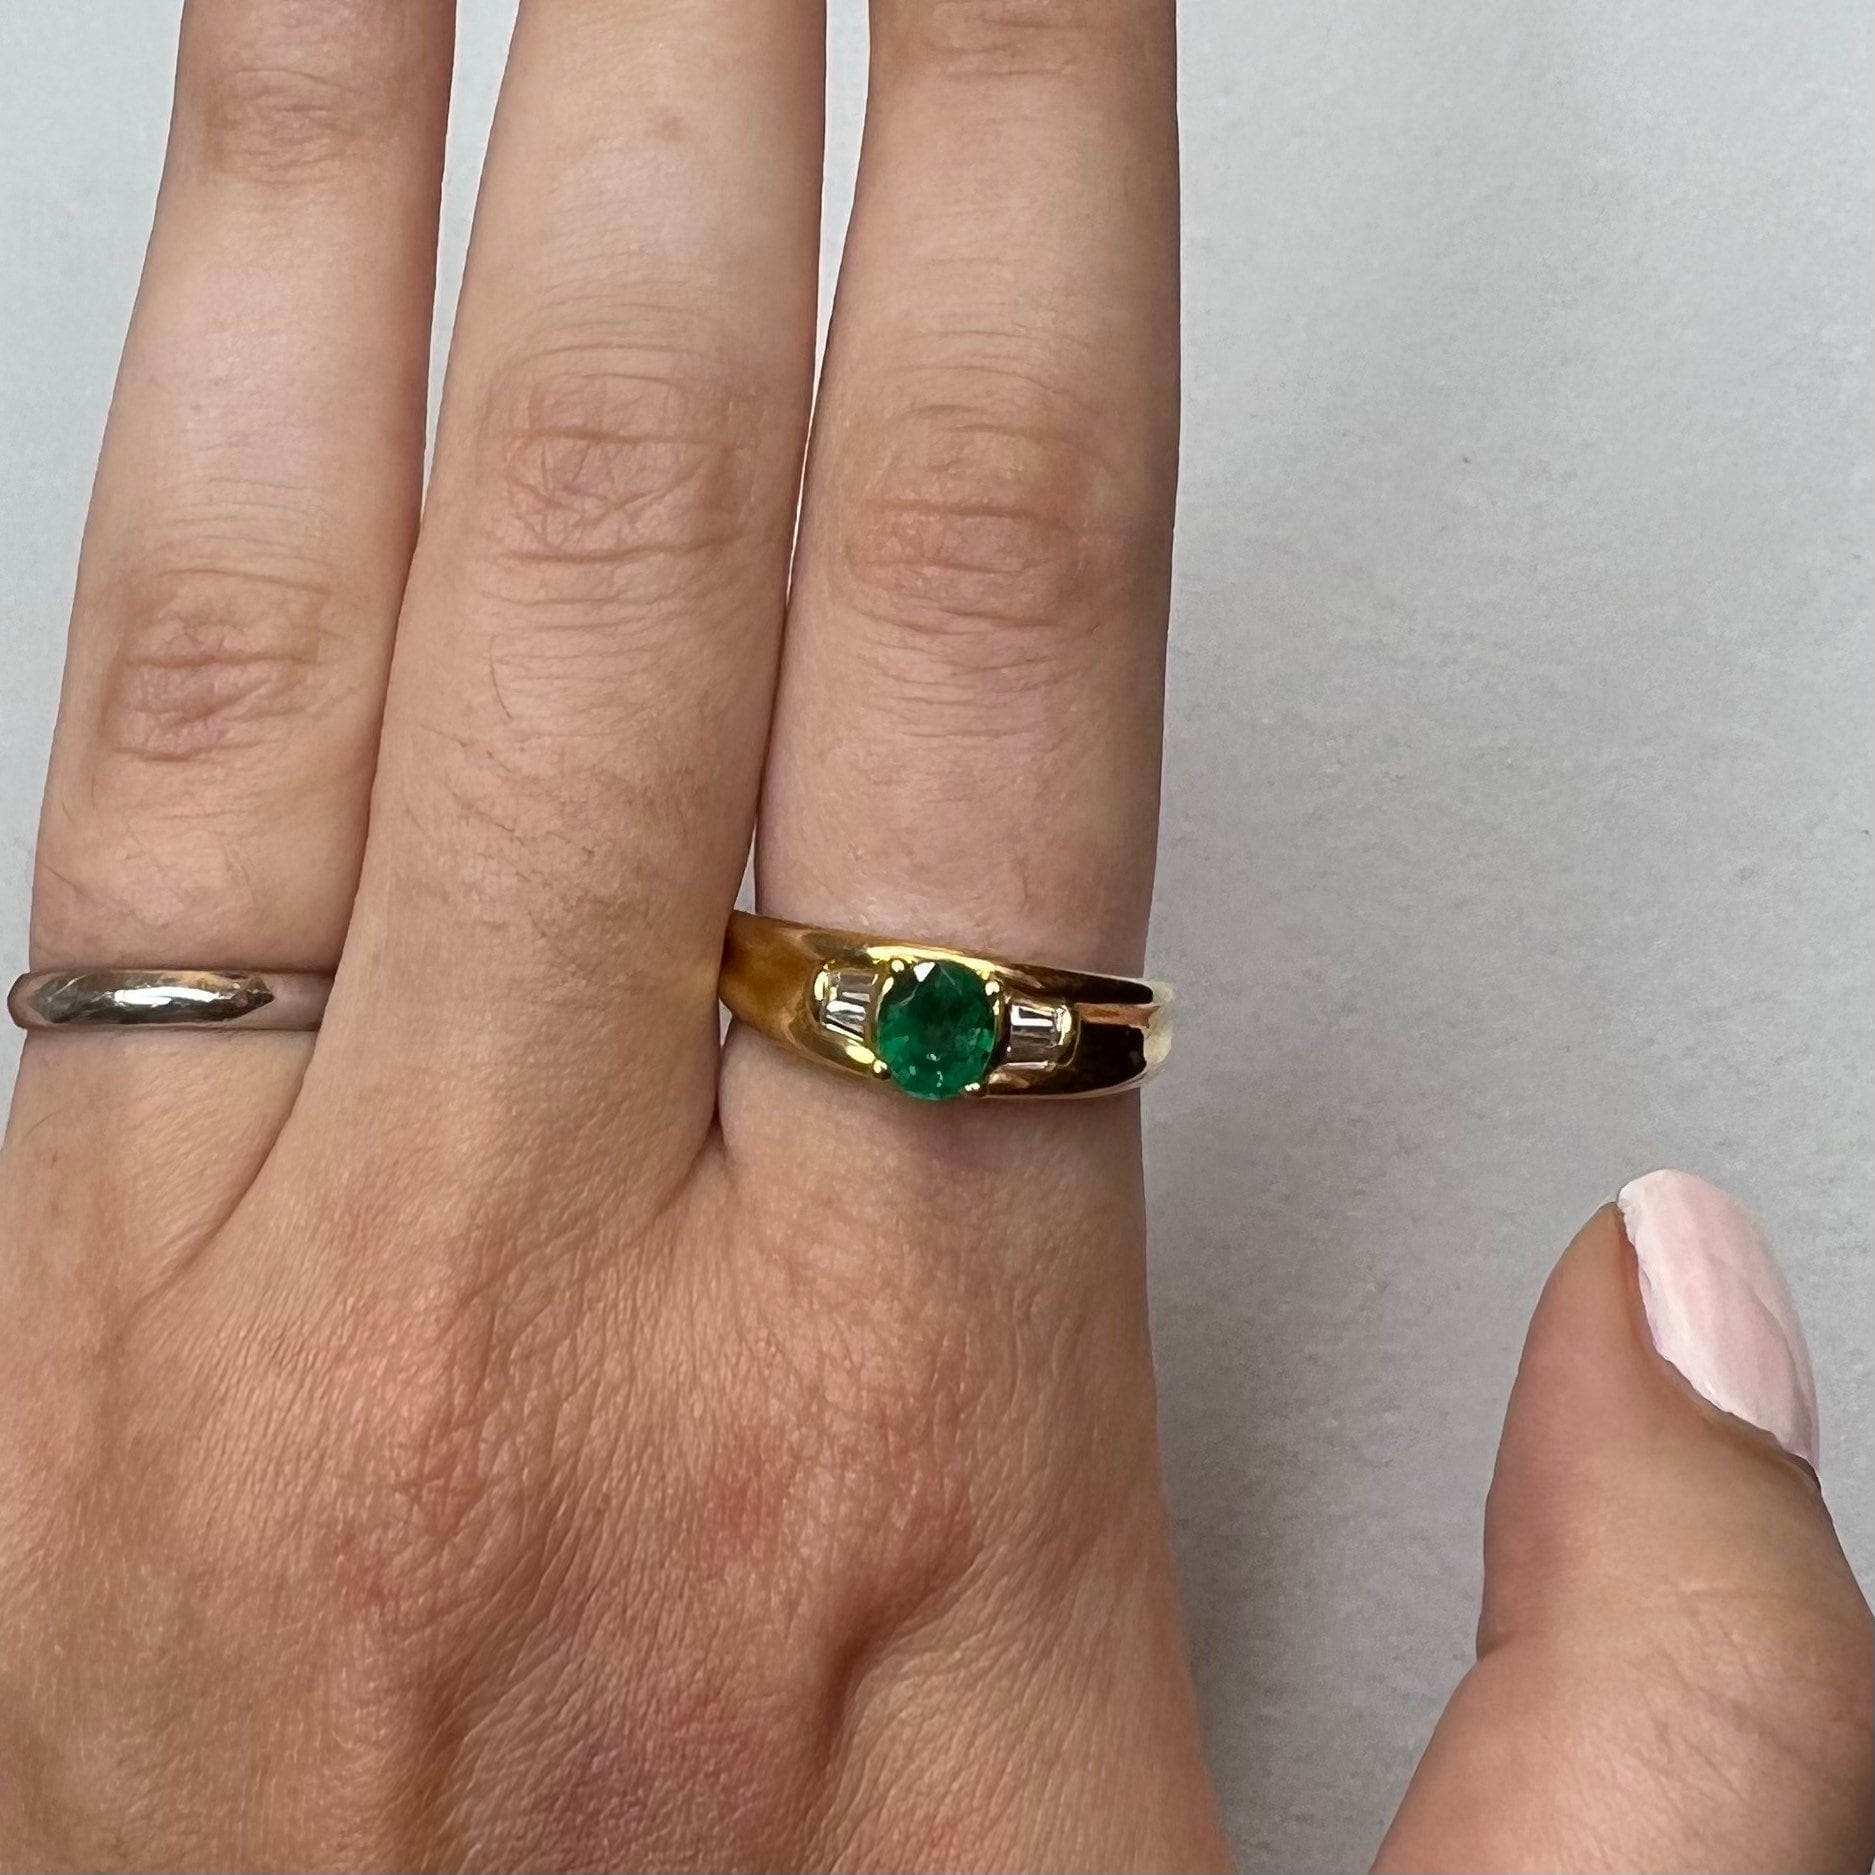 Vintage 18K Natural Emerald & Diamond Ring In Yellow Gold - Emerald Cocktail Ring - Engagement Ring - April May Birthstone - Birthday Gift